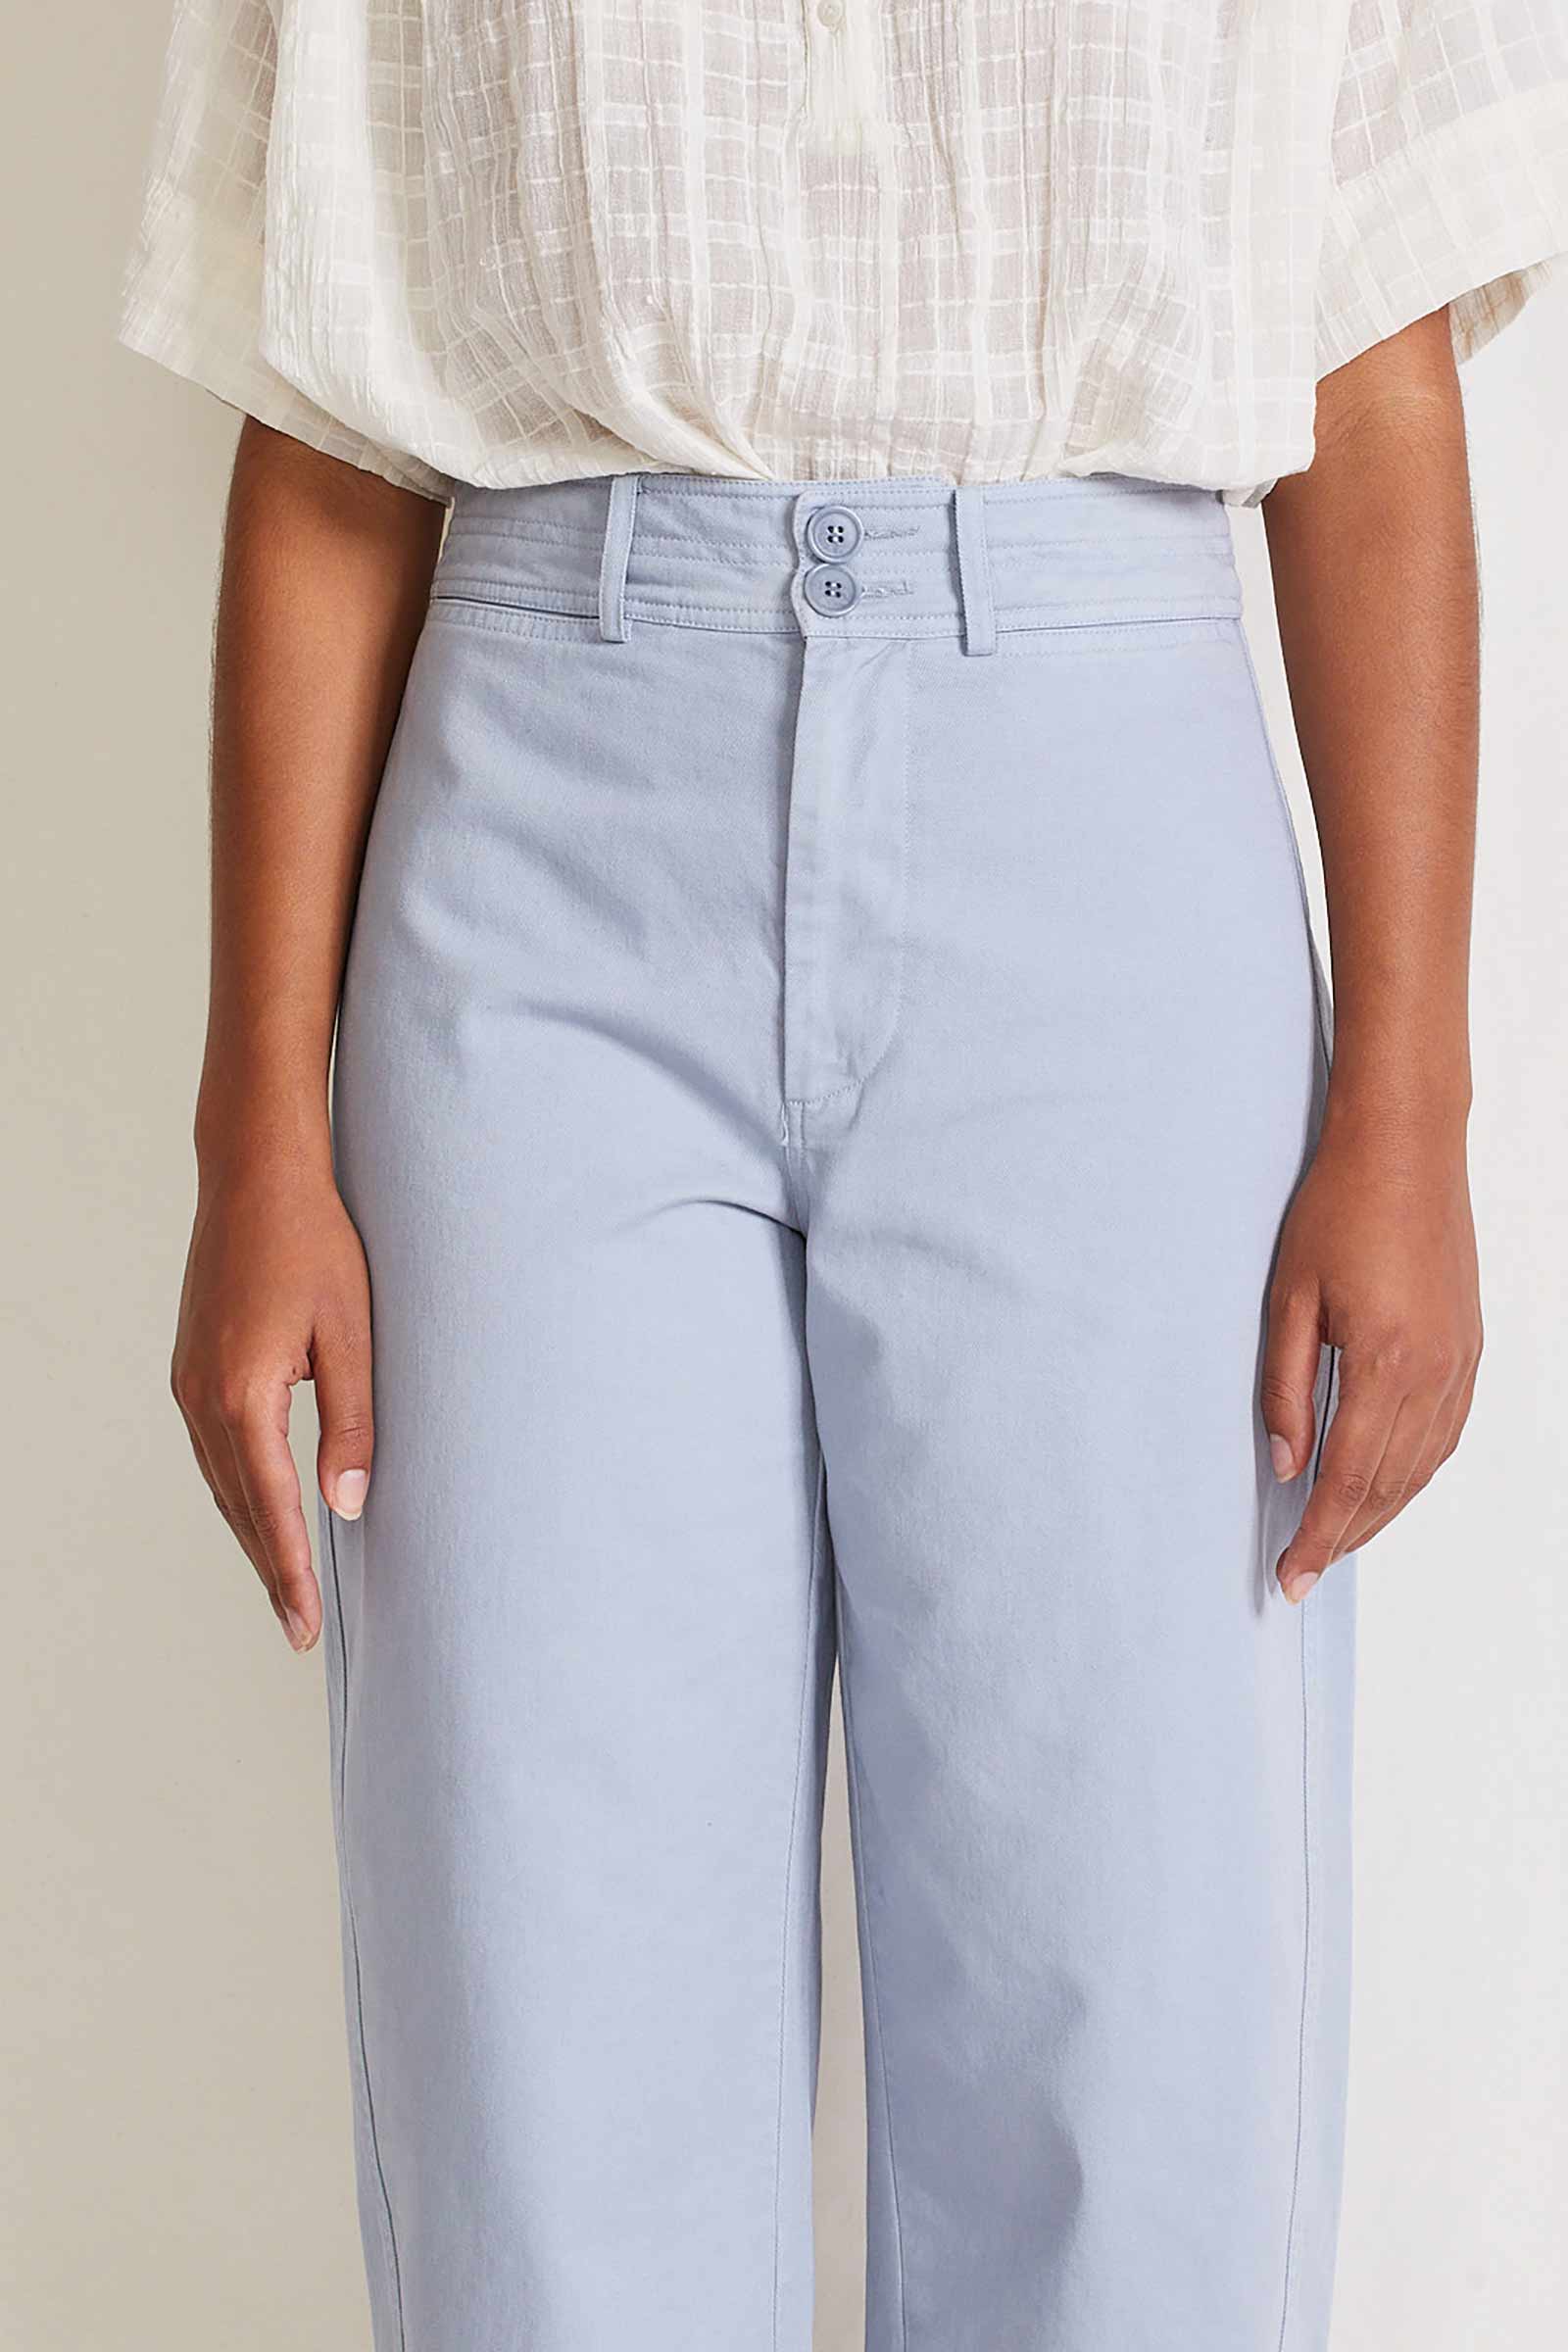 These are an easy staple pant for the summer. Completes with zip closure and a two button detail. Pockets on front and back and are slightly cropped. Made of 100% cotton.